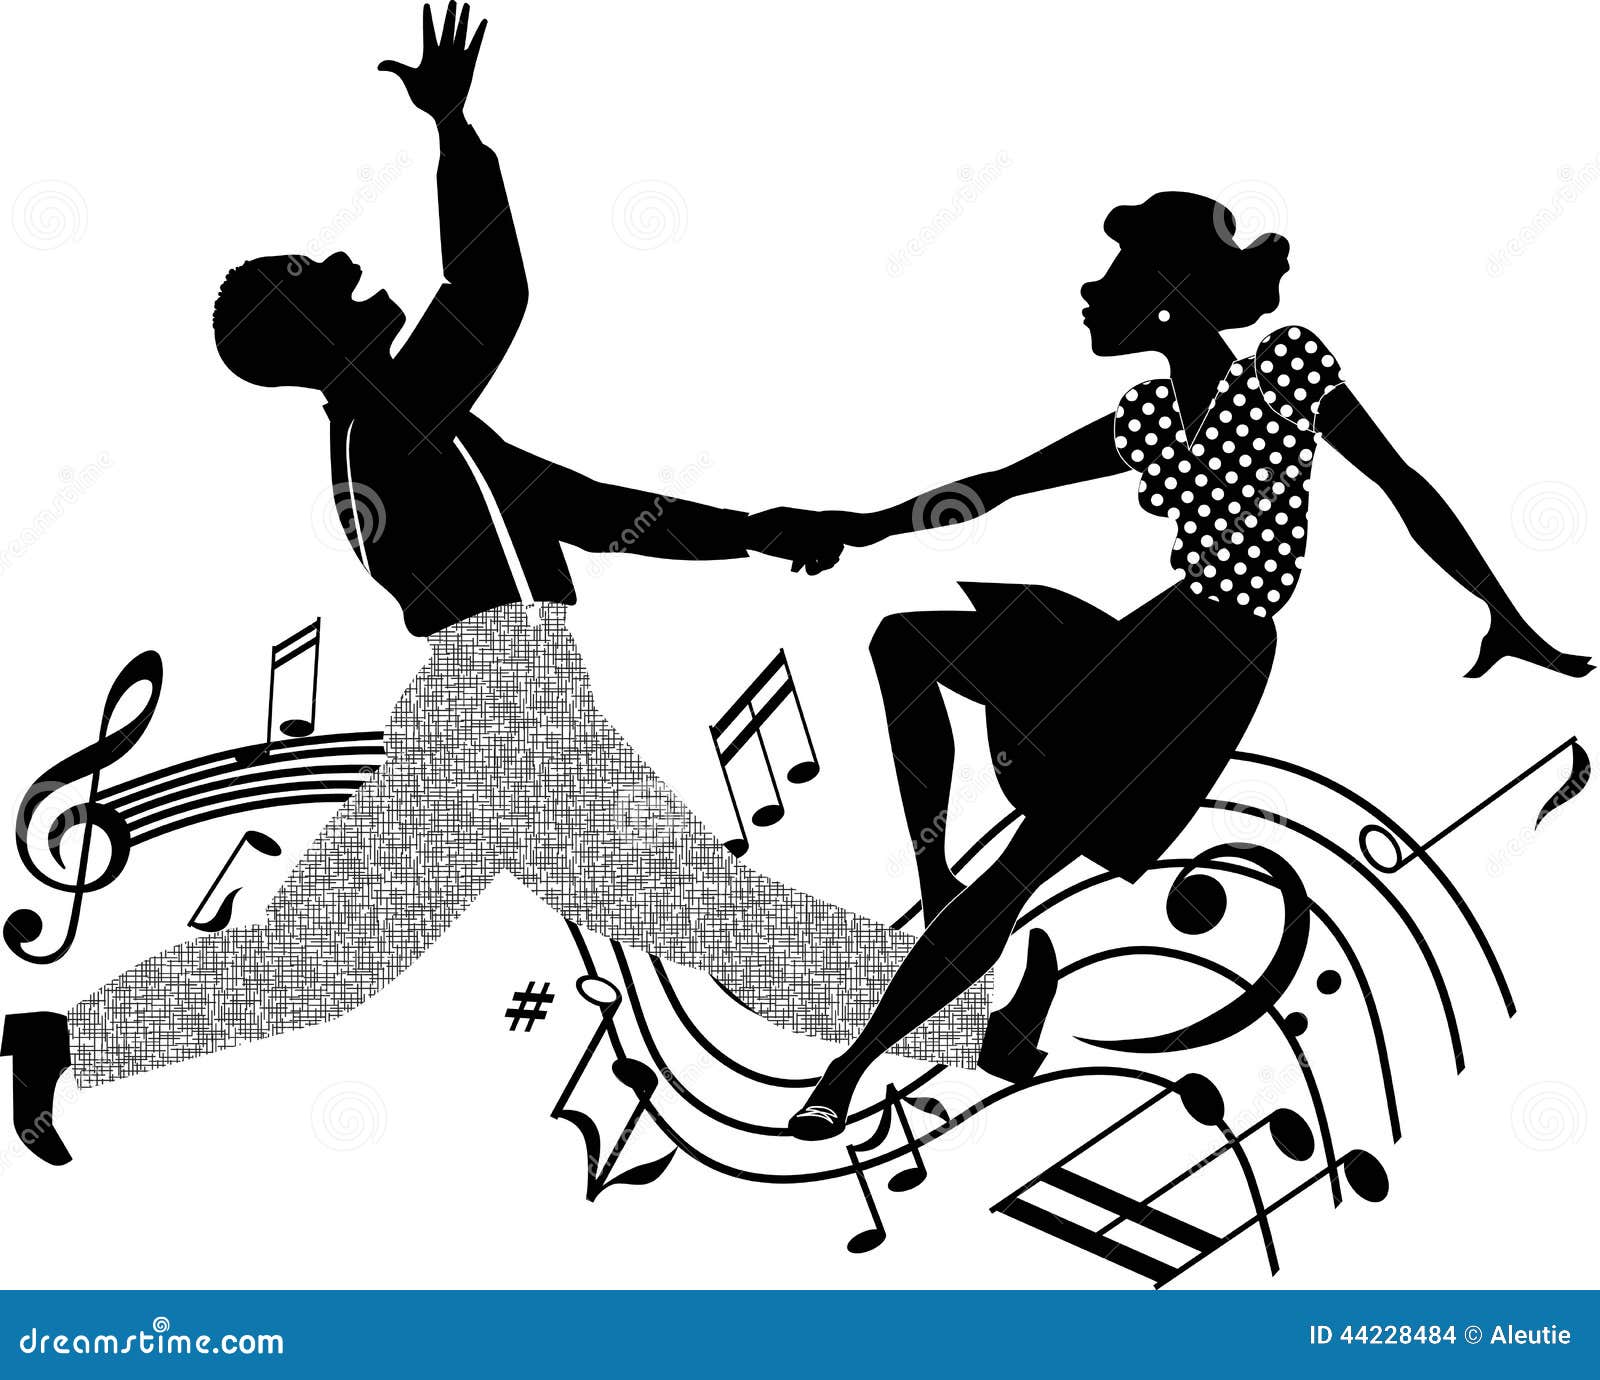 clipart of african dancers - photo #45